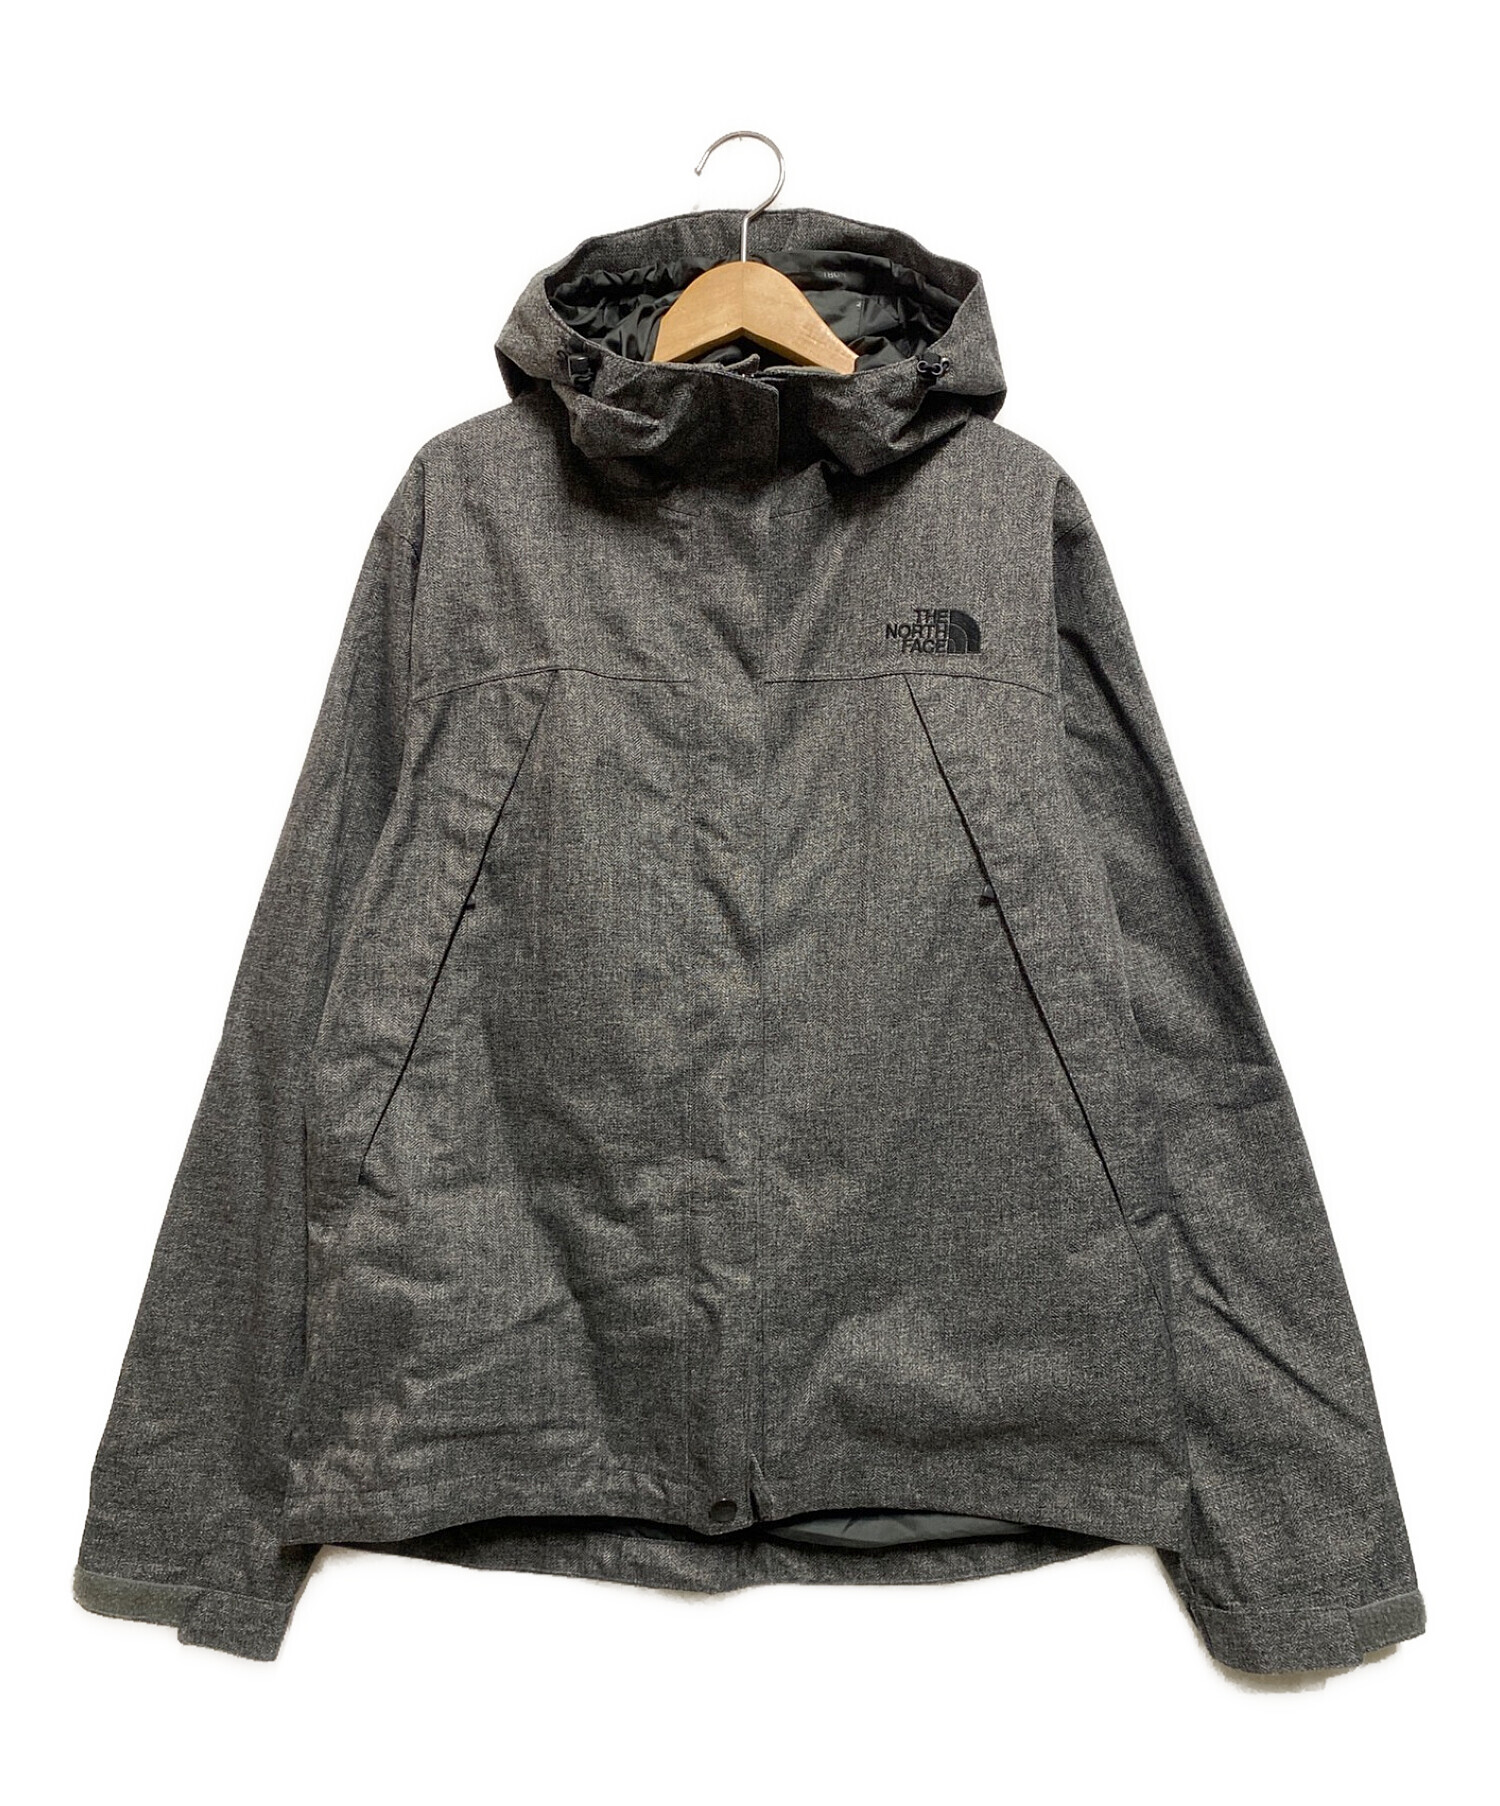 XXL込み North Face Novelty Scoop Jacket